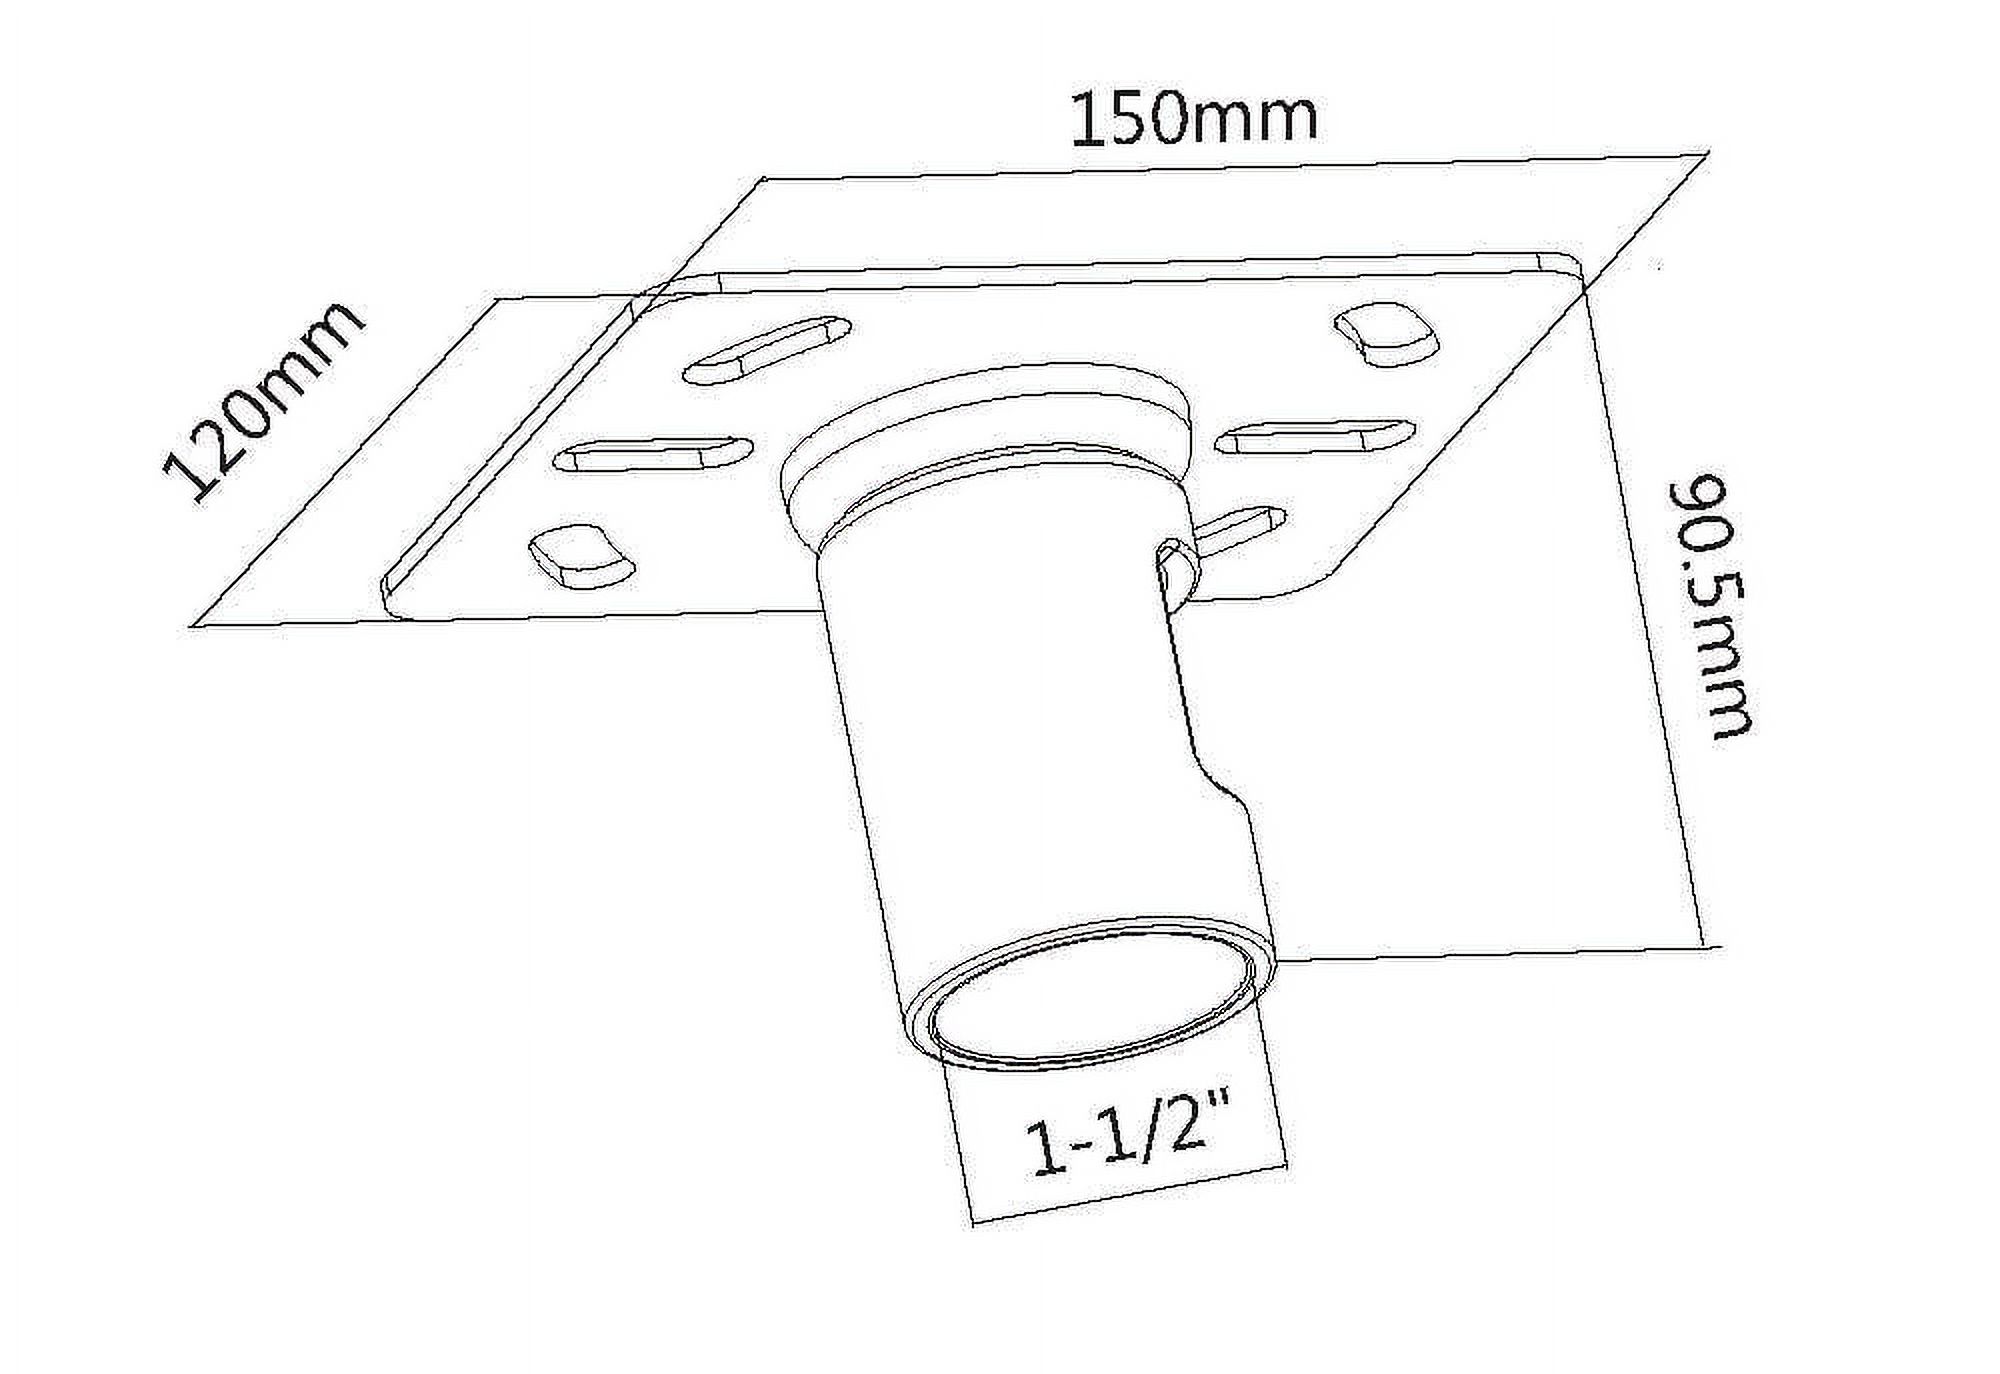 VideoSecu Ceiling Plate Mount Accessory for LCD LED Plasma TV Ceiling Mount, Fit 1.5" Thread Pole Pipe bji - image 2 of 2